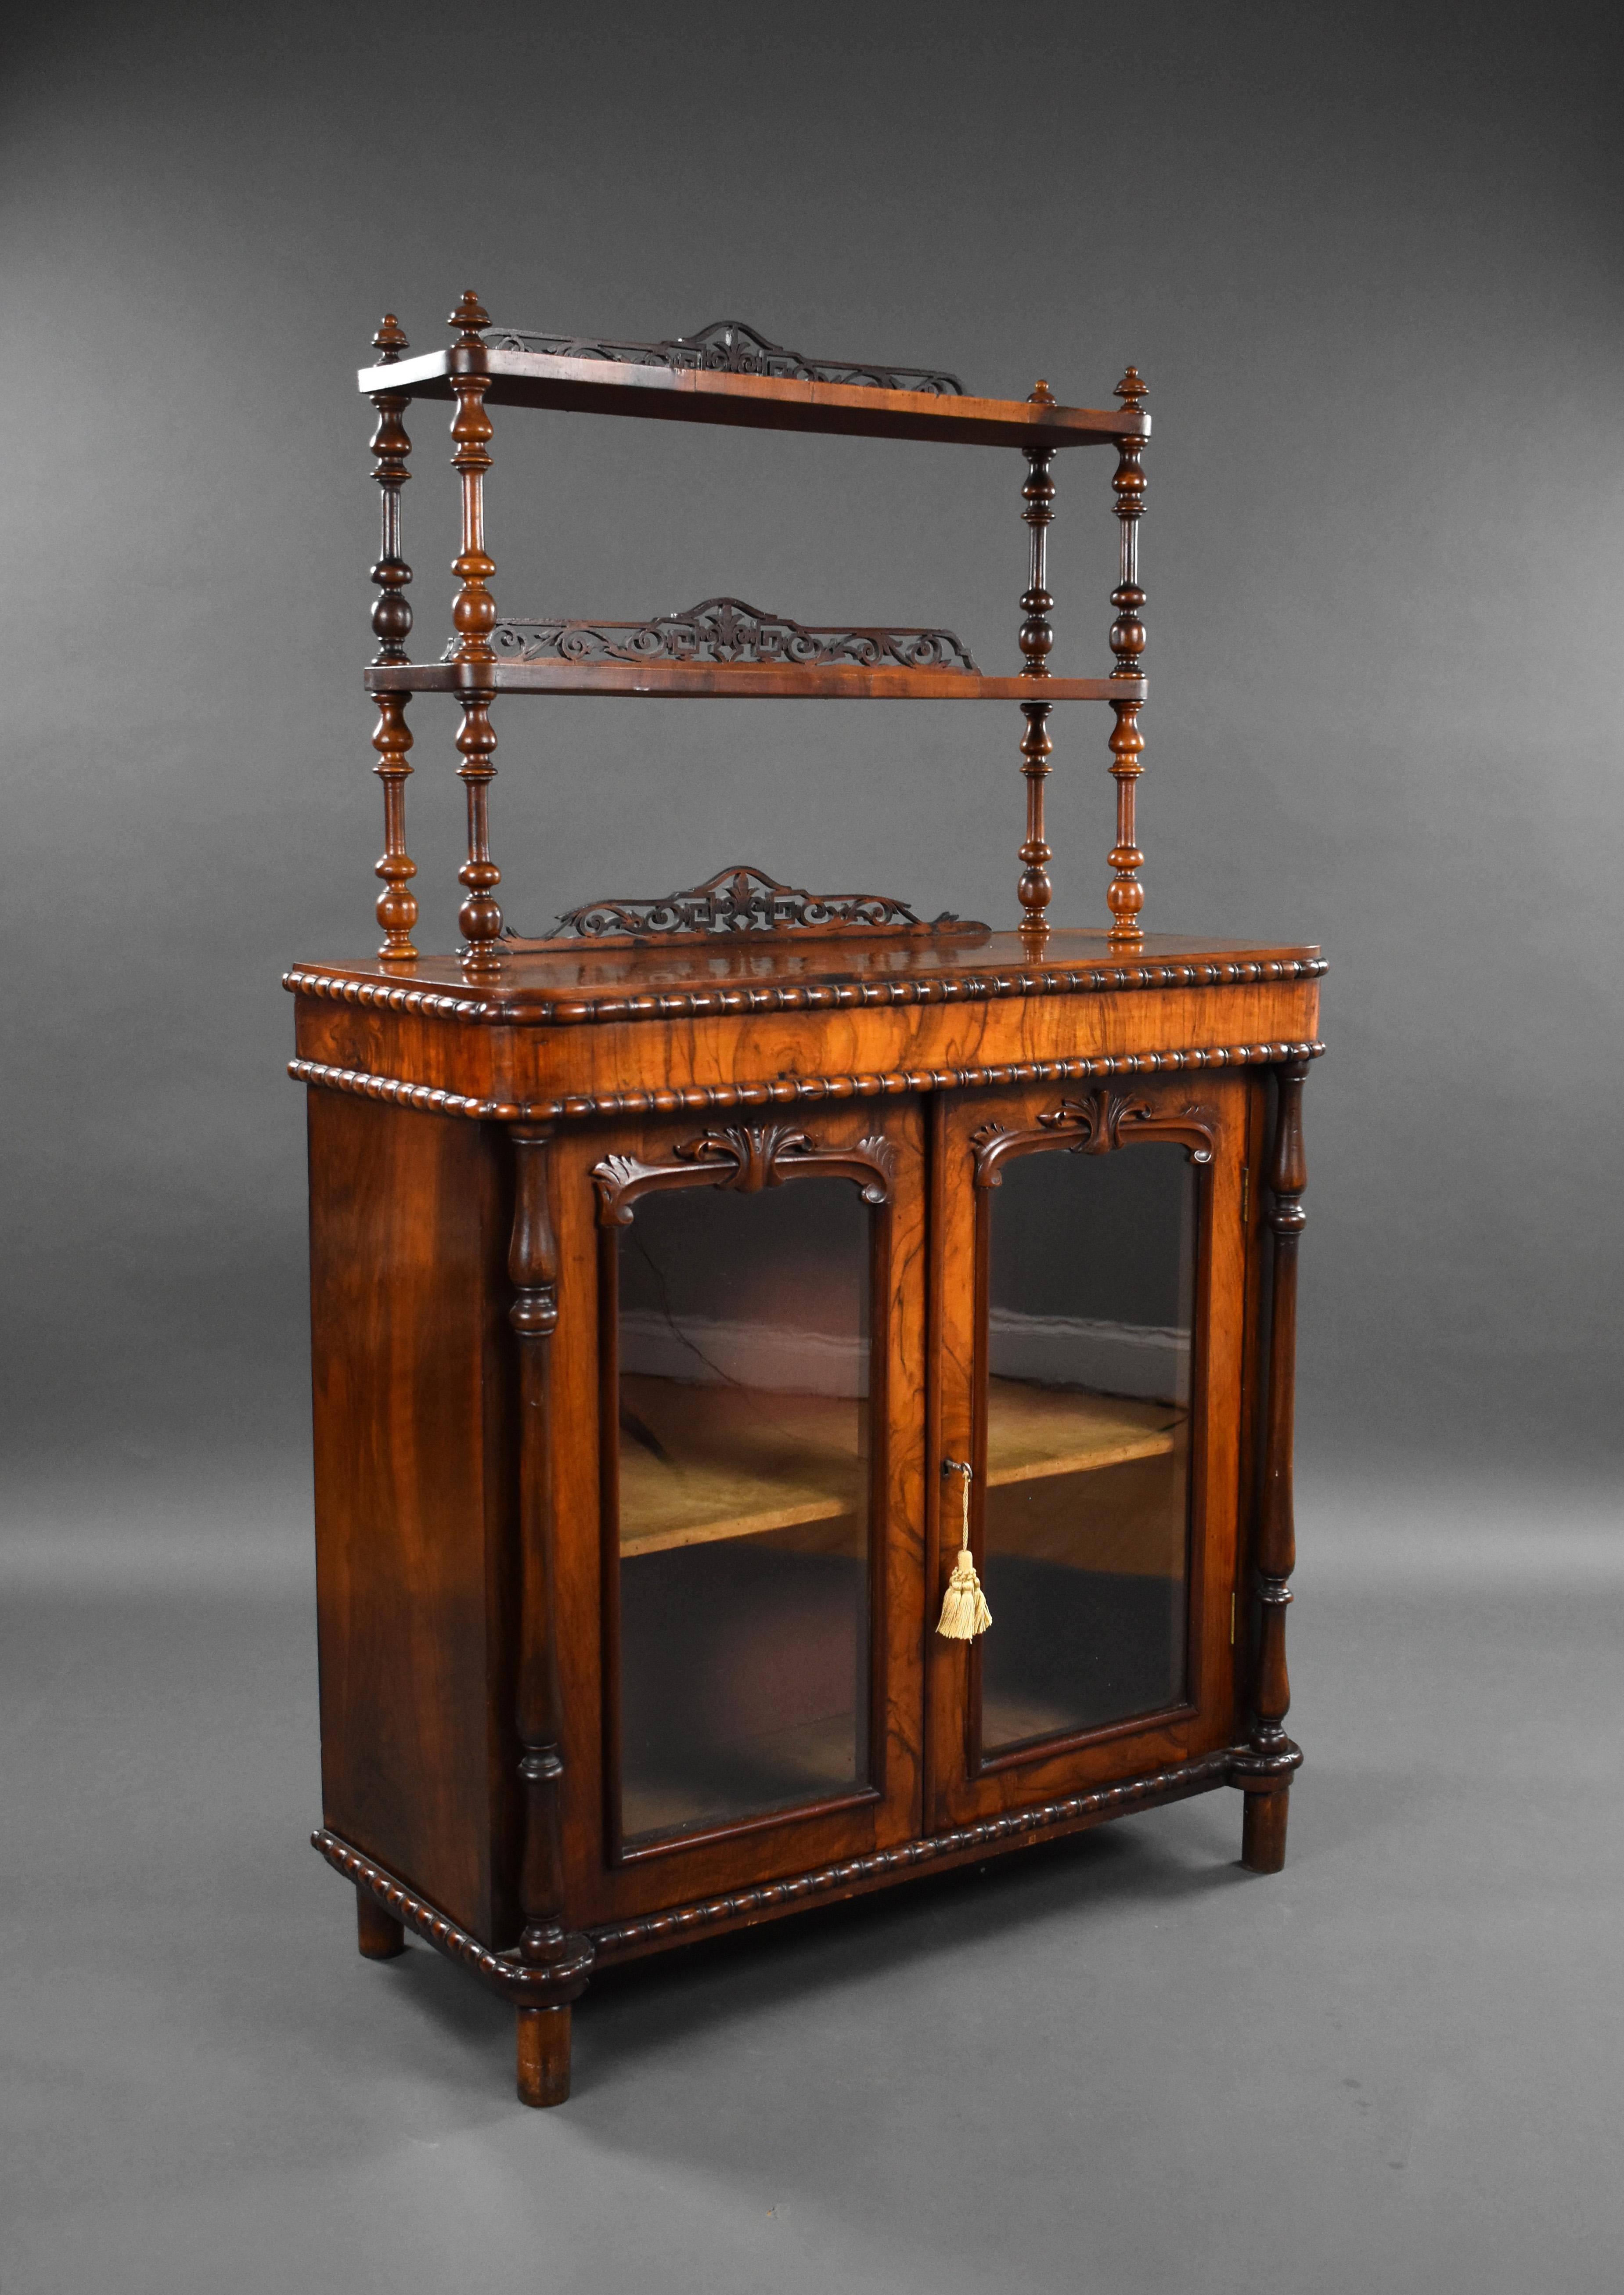 For sale is a good quality Victorian burr walnut chiffonier, having three shelves each with a pierced fret work gallery, above two glazed doors. The chiffonier remains in very good condition, showing light signs of wear commensurate with age and